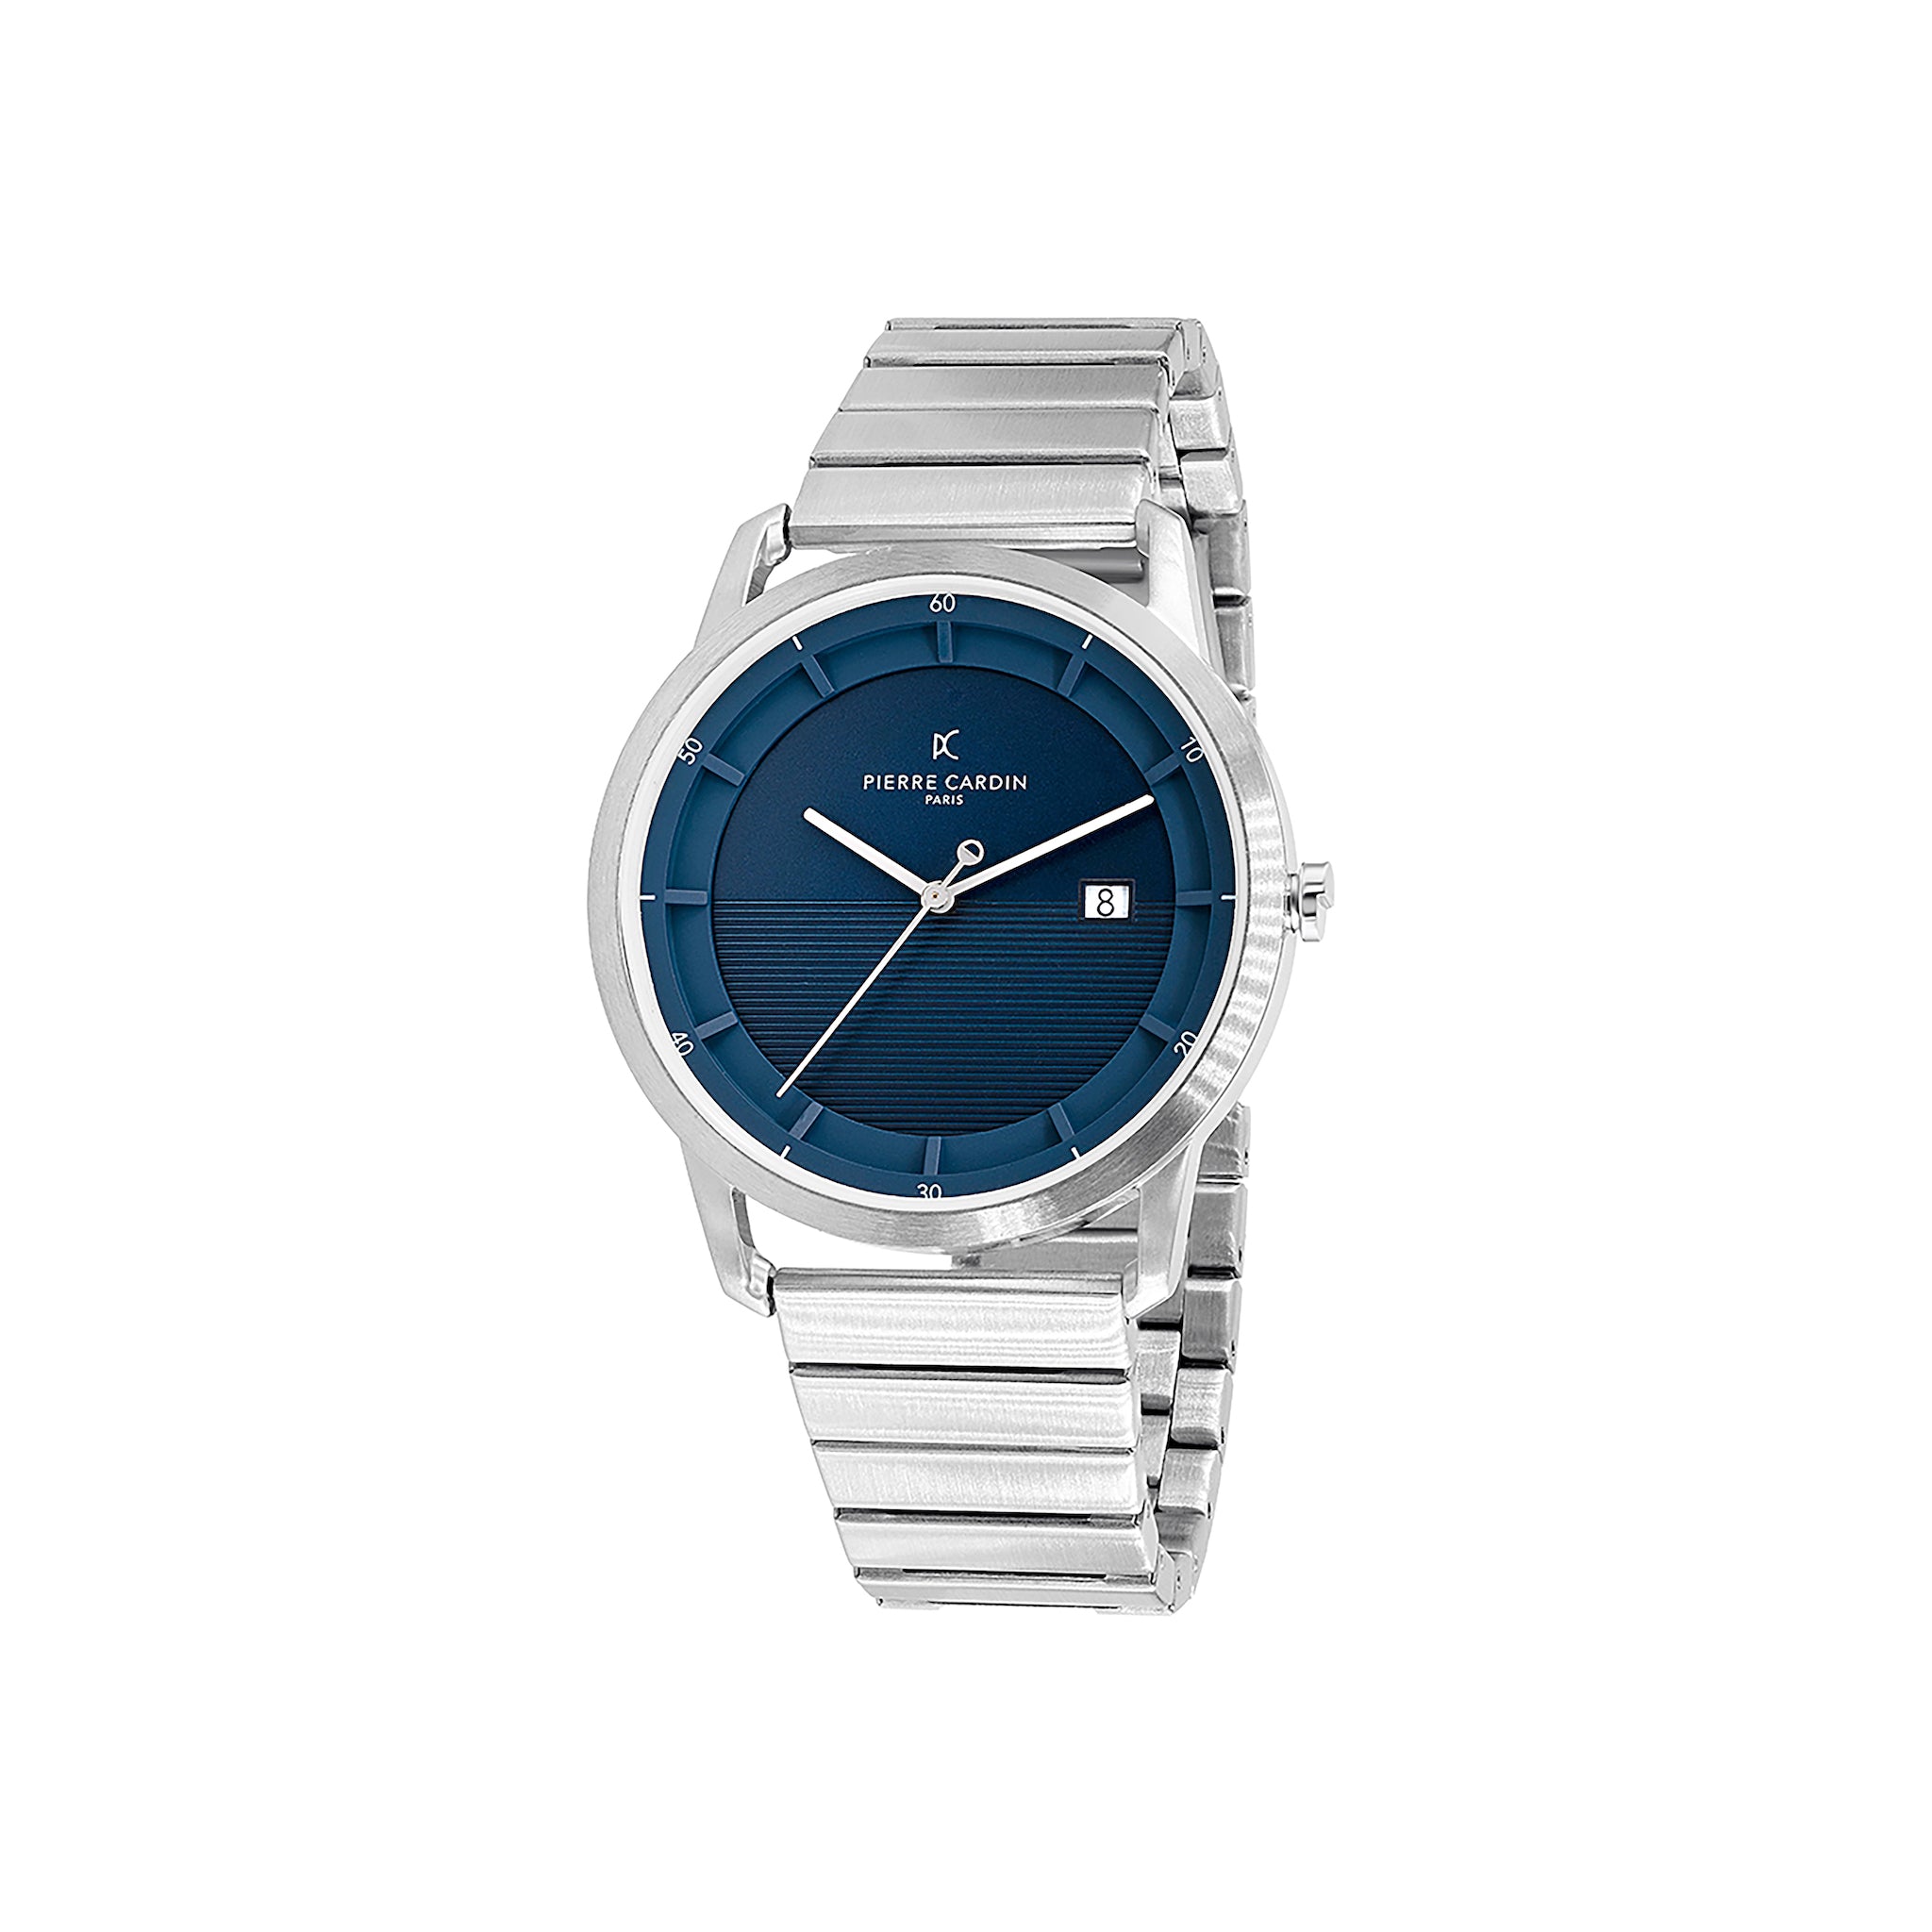 St. Germain Lines Watch with Blue Dial, Silver Case and Metal Links St